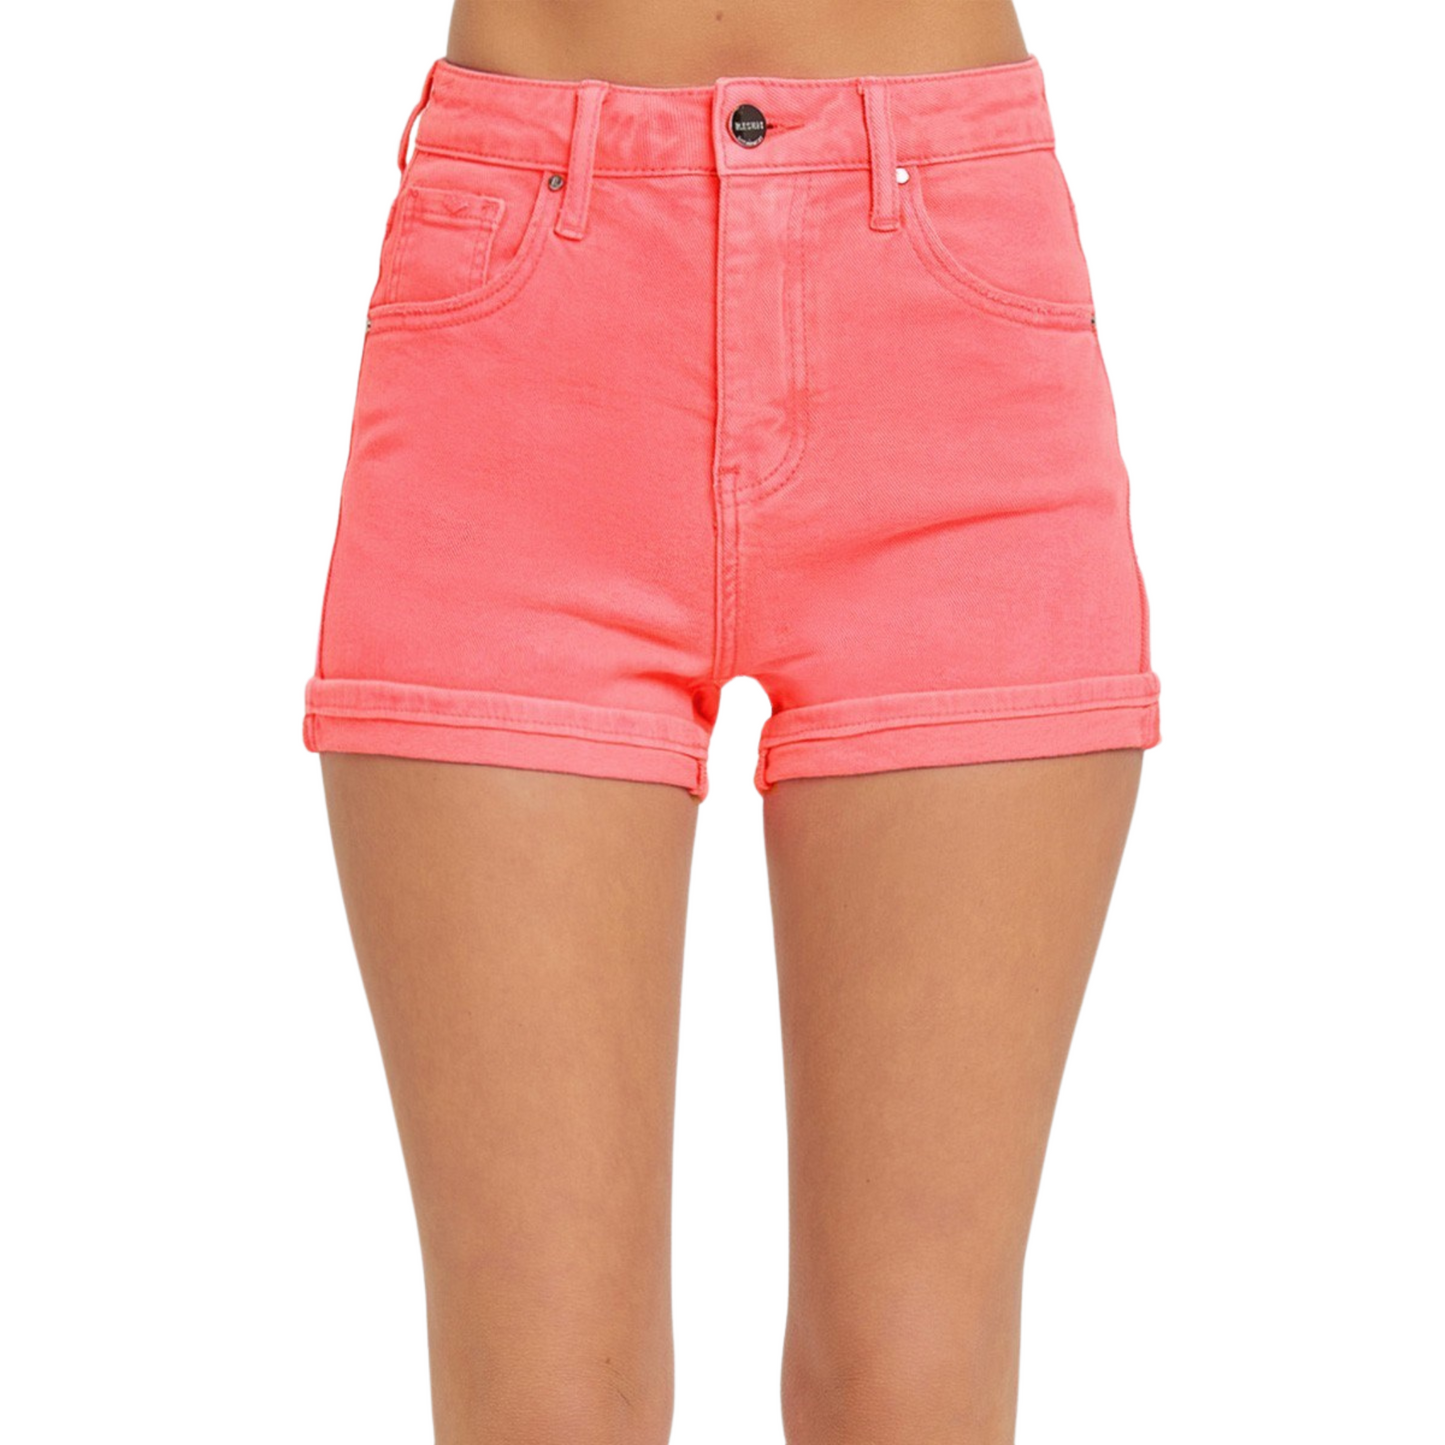 Elevate your summer style with our High Rise Cuffed Shorts. The flattering high rise design offers a slimming effect, while the vibrant coral color adds a pop to your wardrobe. From the renowned Risen brand, these shorts are crafted with expertise for the perfect fit and feel.